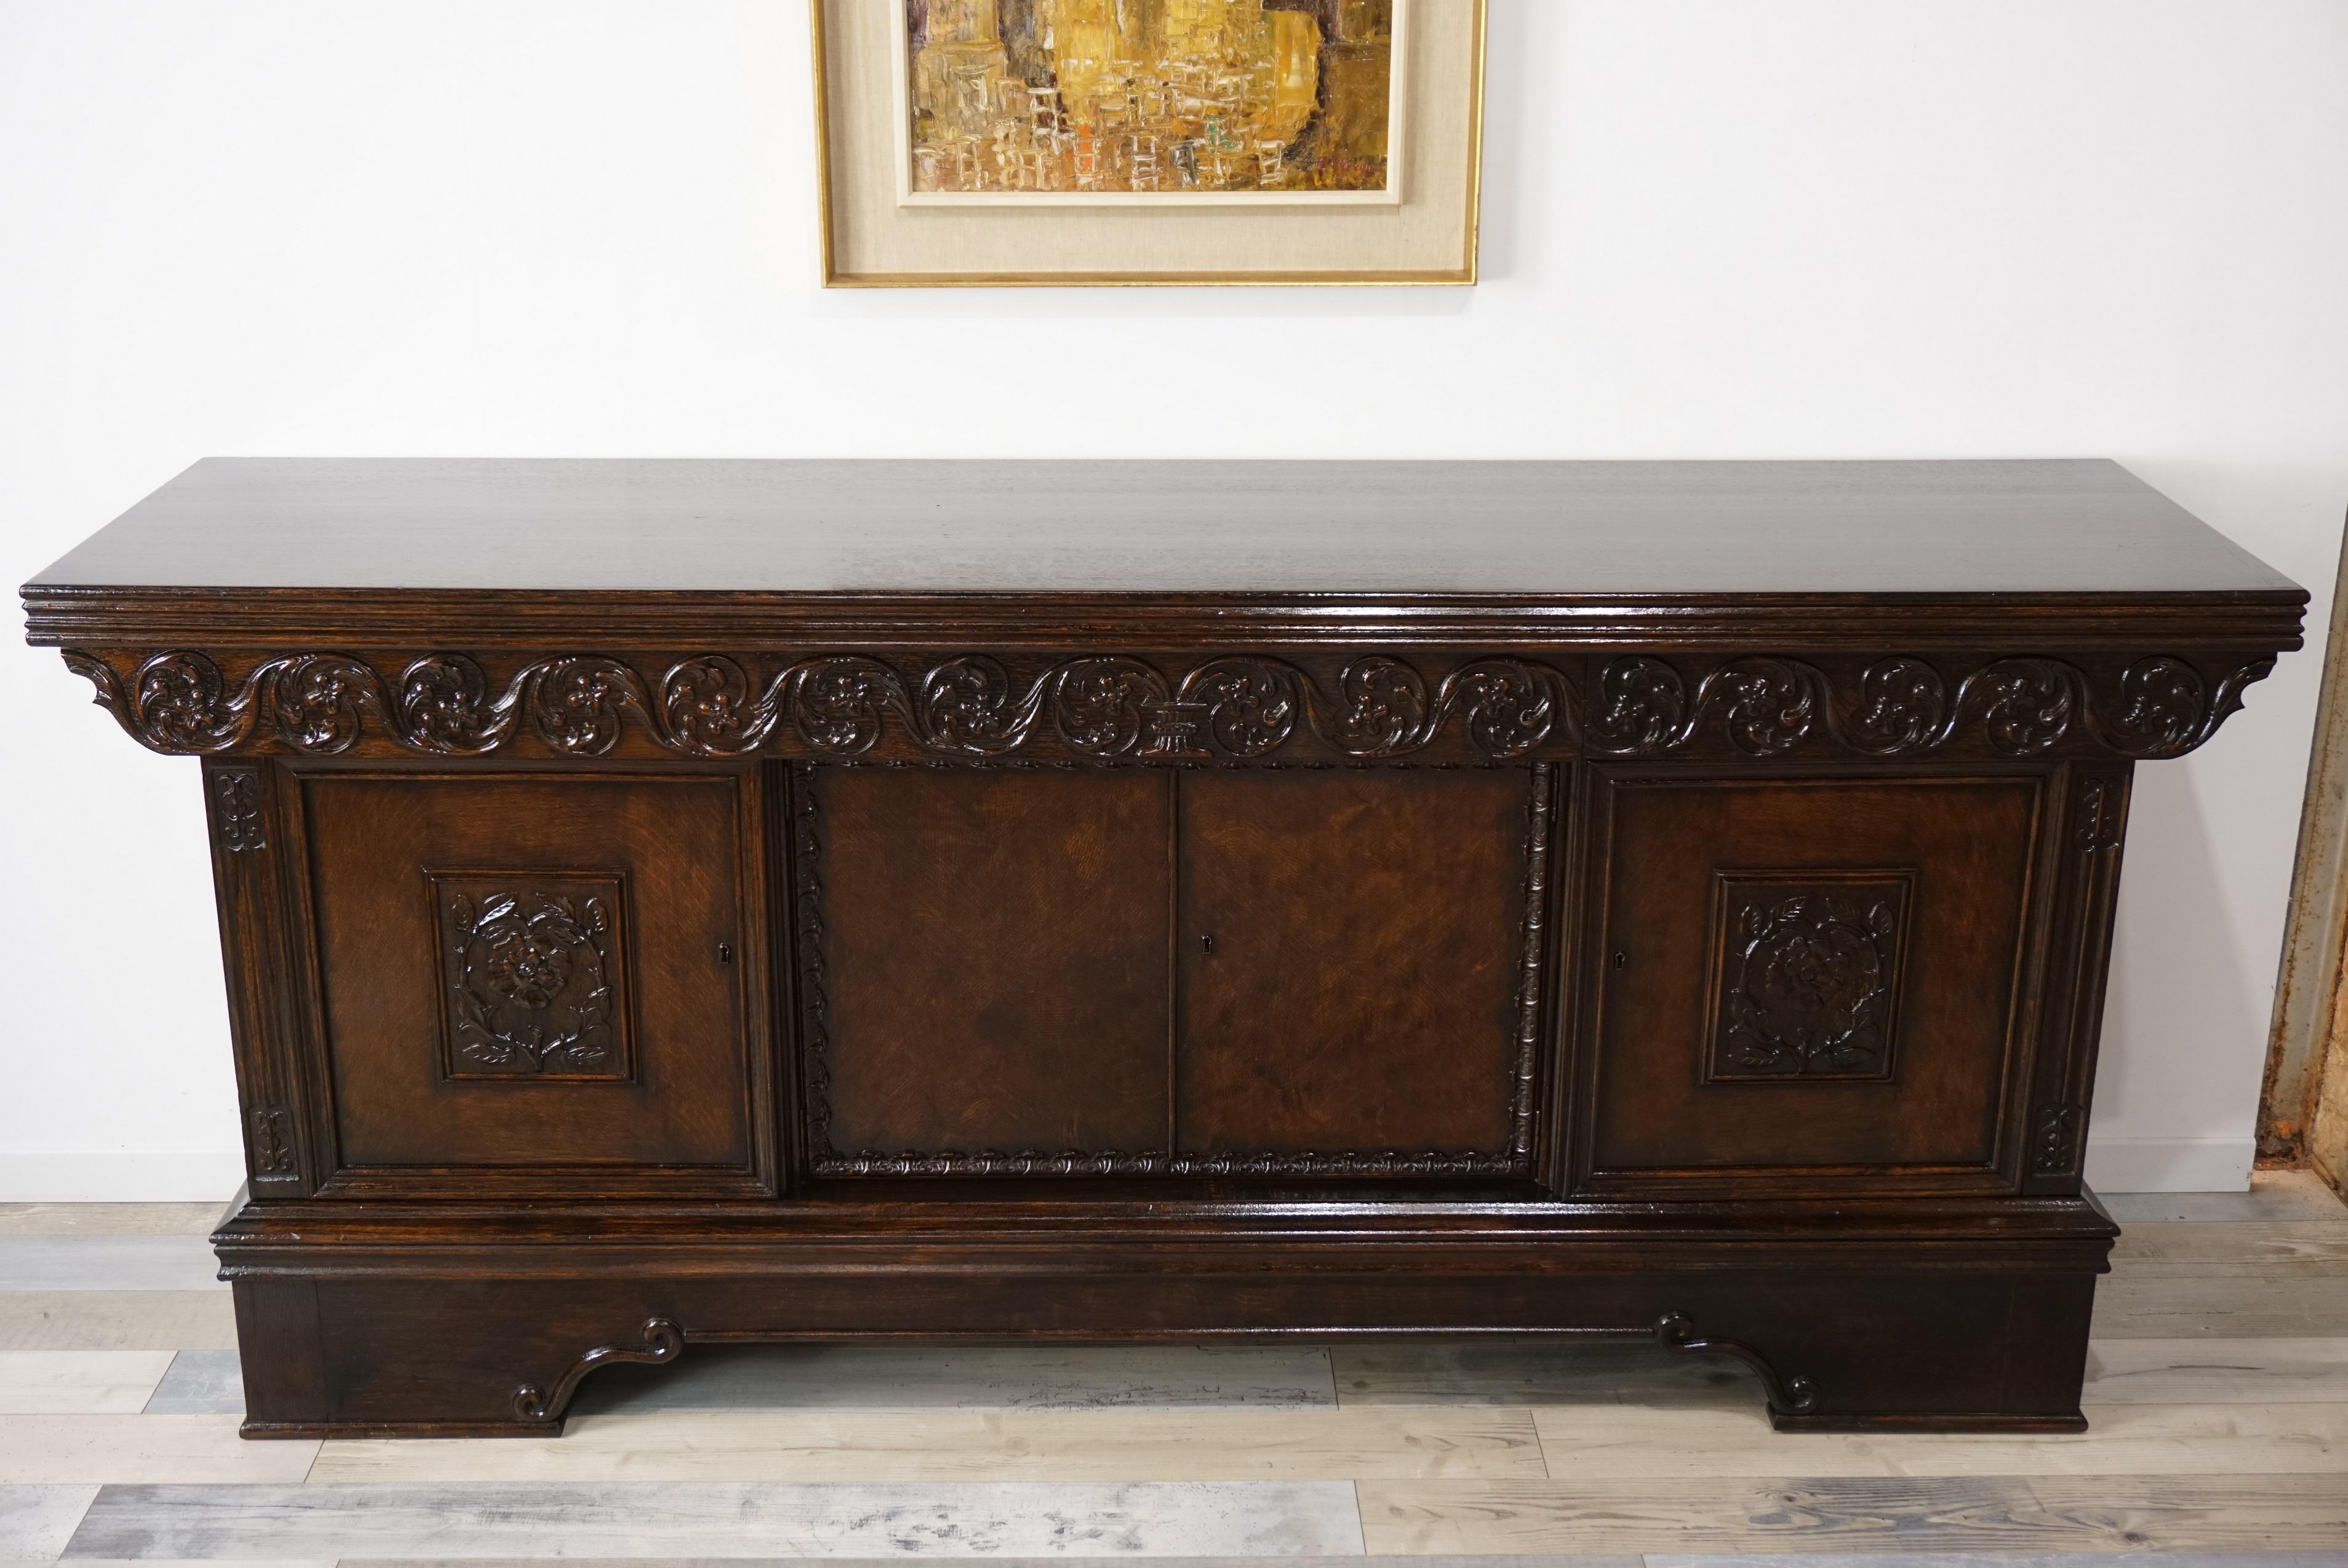 Old oak wooden sideboard or antique buffet, work late 19th-early 20th century, neo-Renaissance style and finely carved scrolls, roses and foliage, consists of four doors and three drawers belt. All in very good state of conservation given its age!